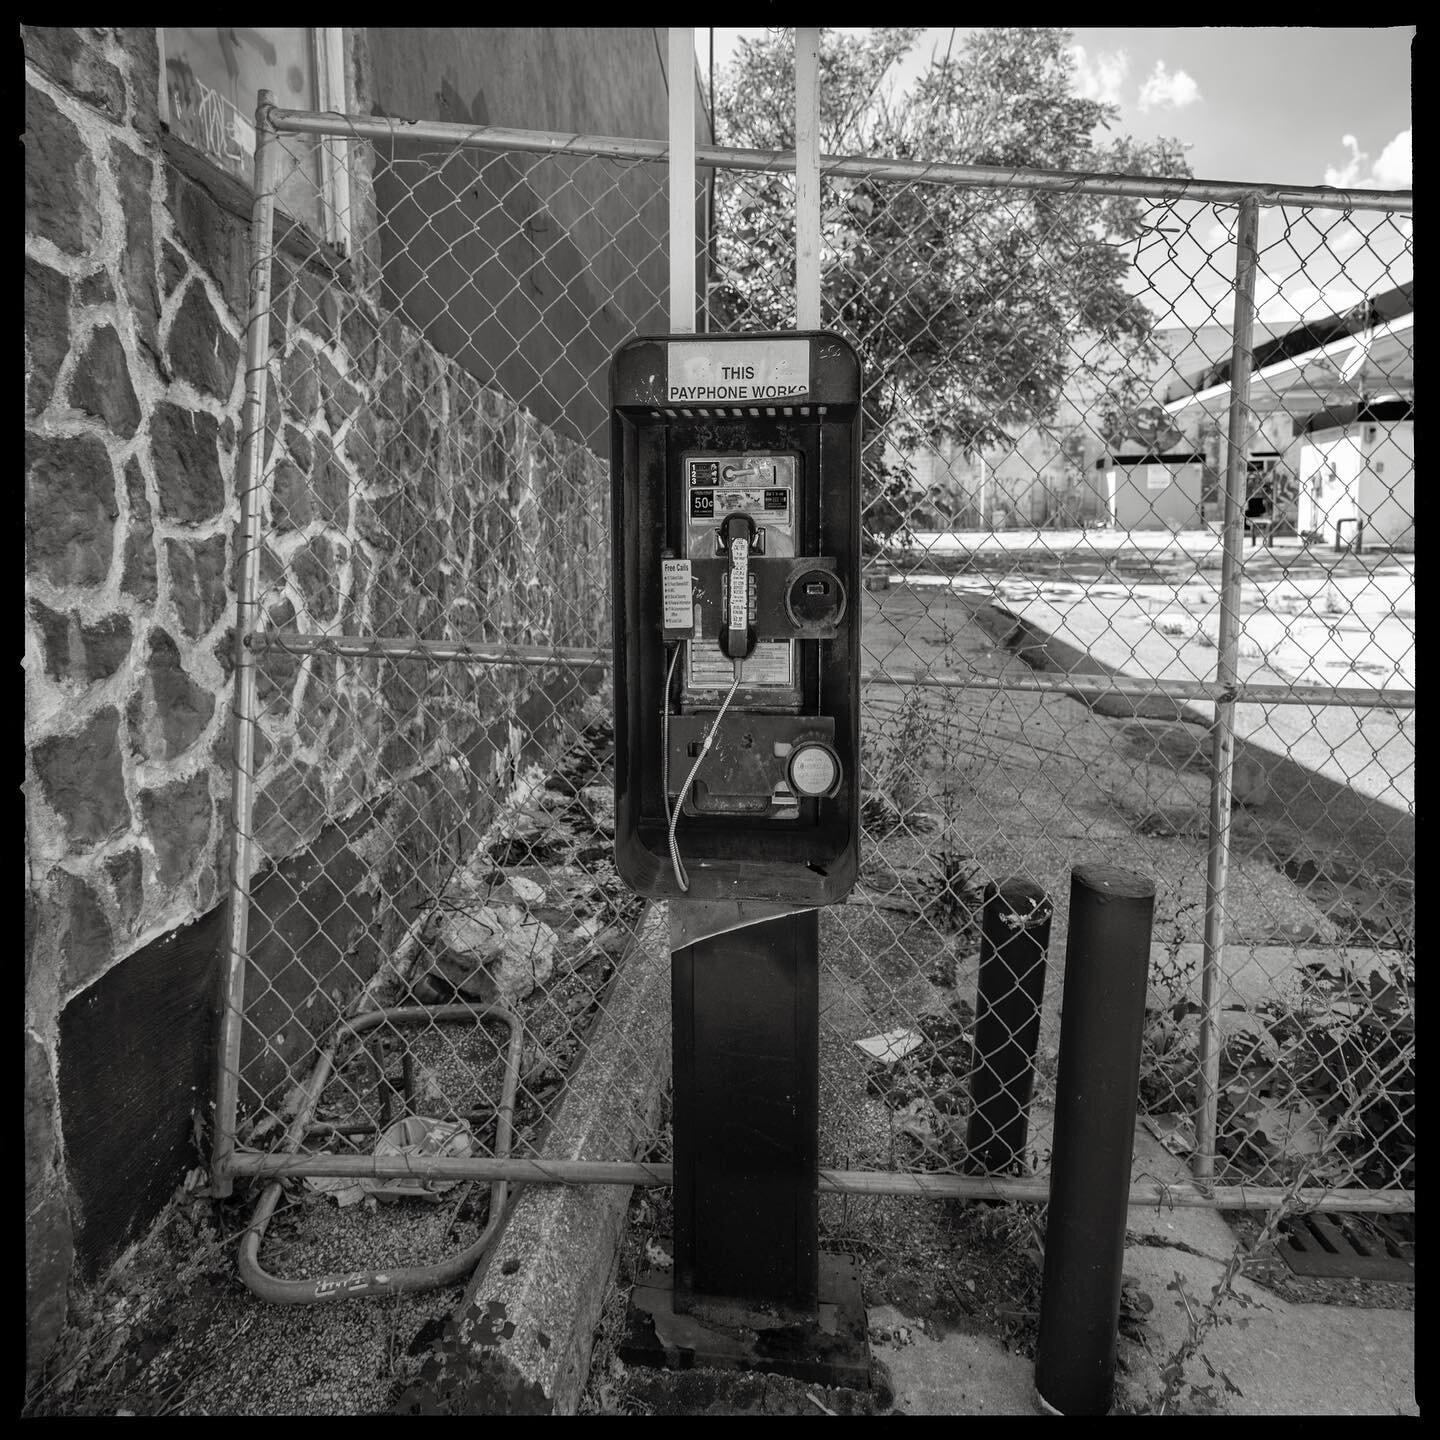 Post 1 of 2

People often inquire about how I approach payphones as my subject. I look at each payphone in relation to its environment to help portray the image as if you could imagine a person using each payphone. I typically use one roll of film pe